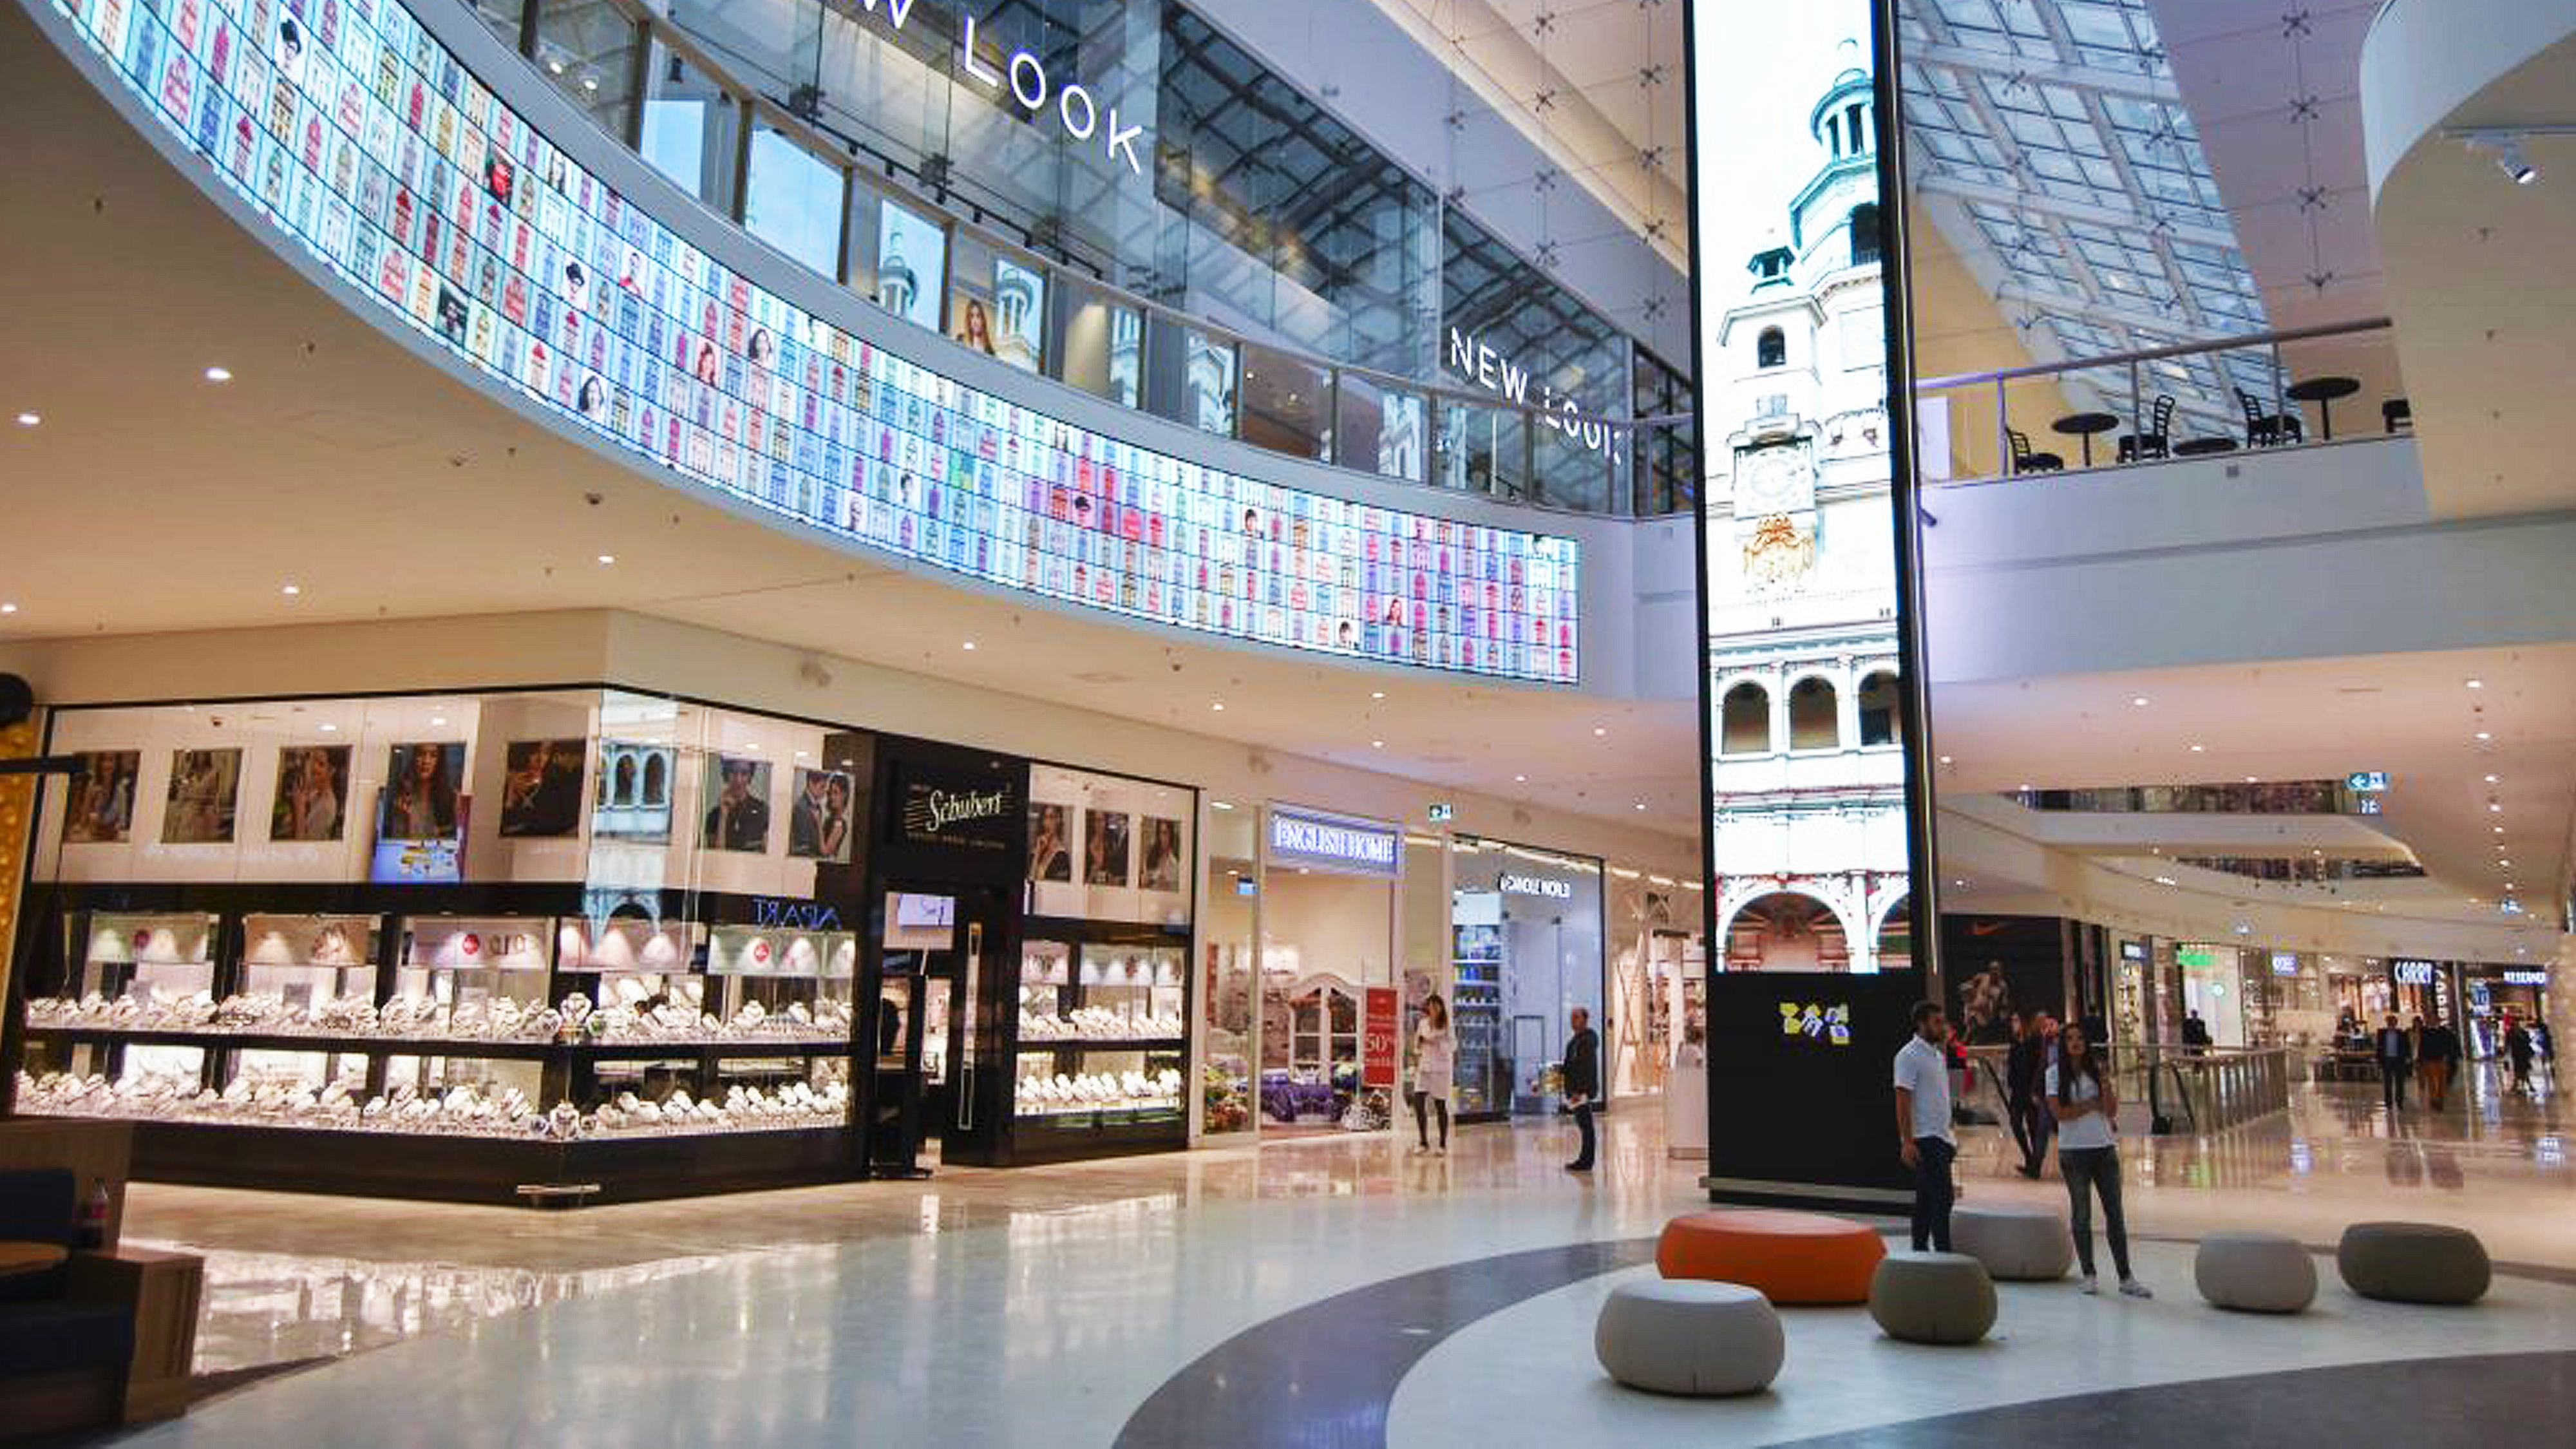 Shopping mall with a lot of stores and bright digital screens